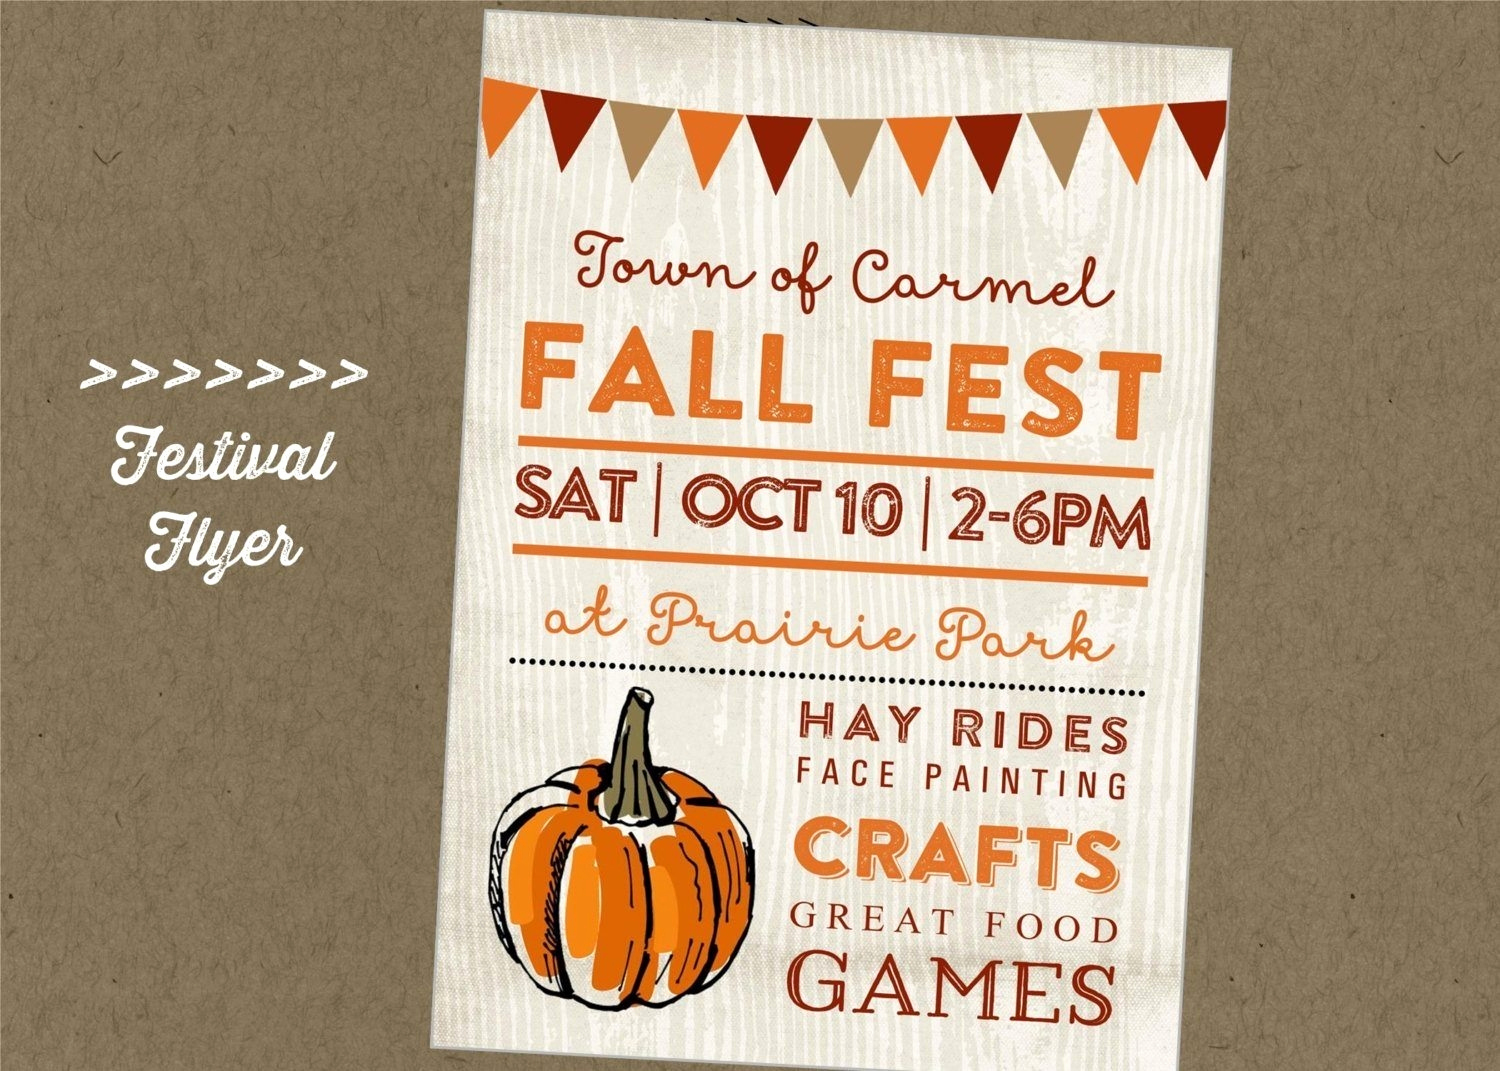 008 Fall Festival Flyer Templates Free Template Ideas Inspirational - Free Printable Fall Festival Flyer Templates